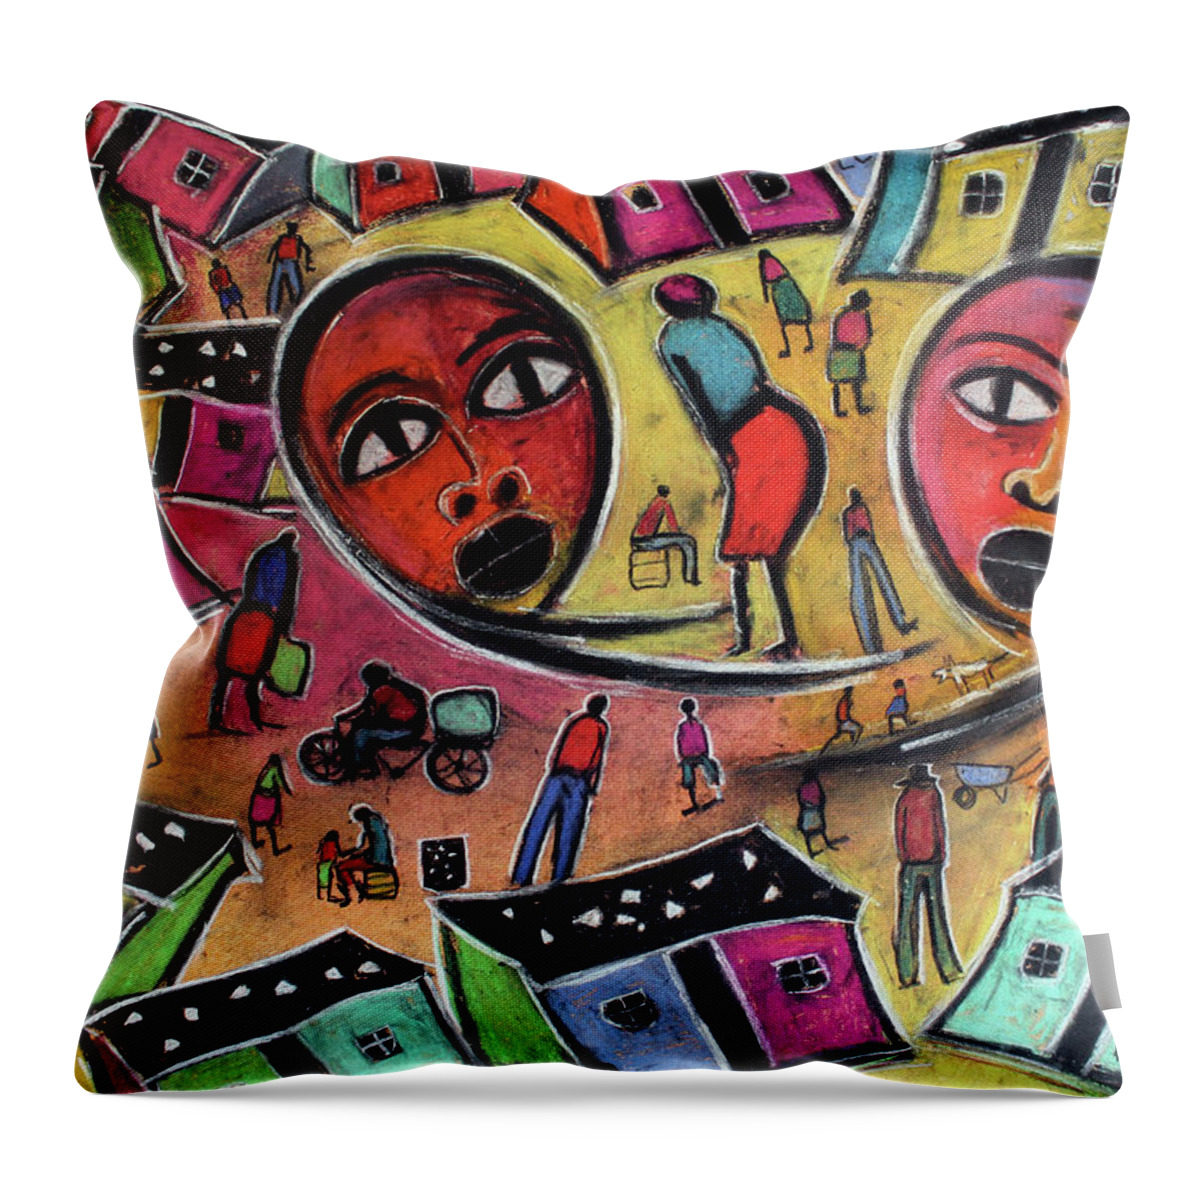  Throw Pillow featuring the painting Hey Sister by Eli Kobeli